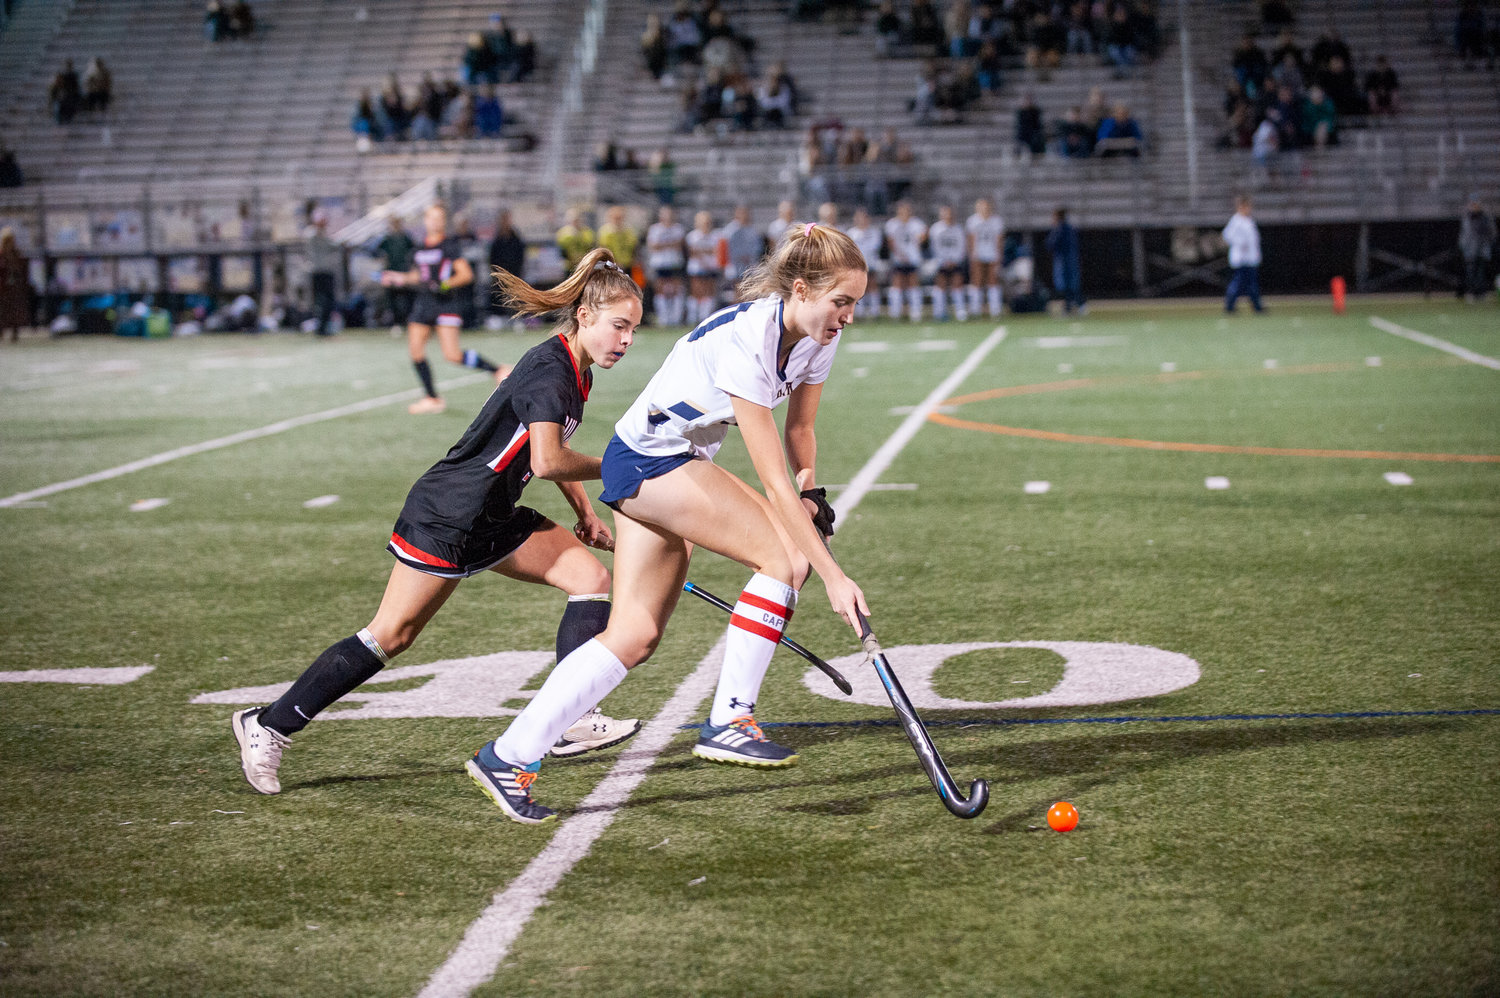 Senior Zoe Day helped keep the ball away from Dulaney during a 4-1 win in the 4A state semifinals.